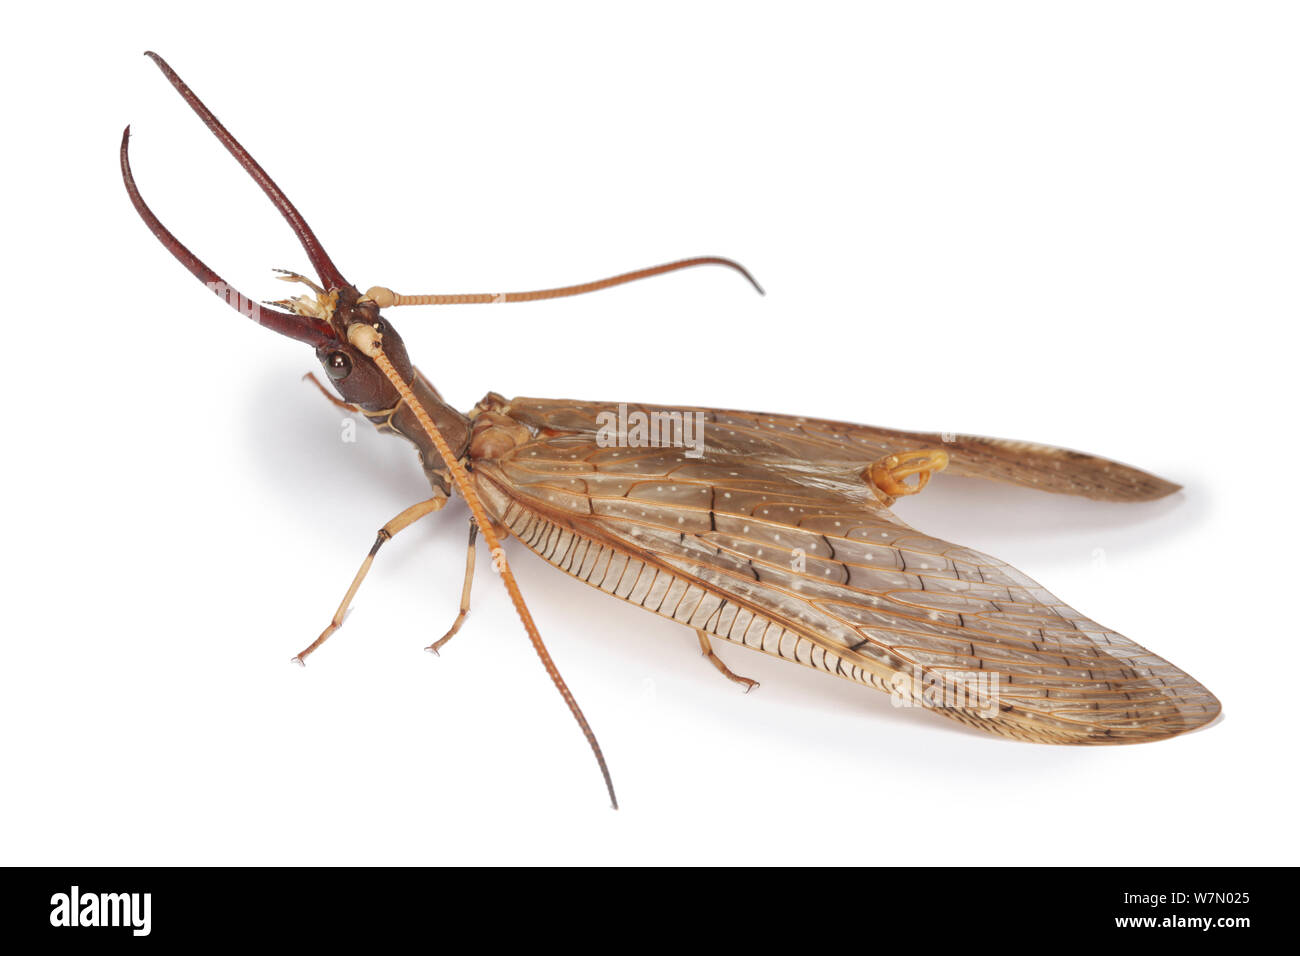 Dobsonfly (Corydalus luteus) masculin, du Costa Rica Banque D'Images